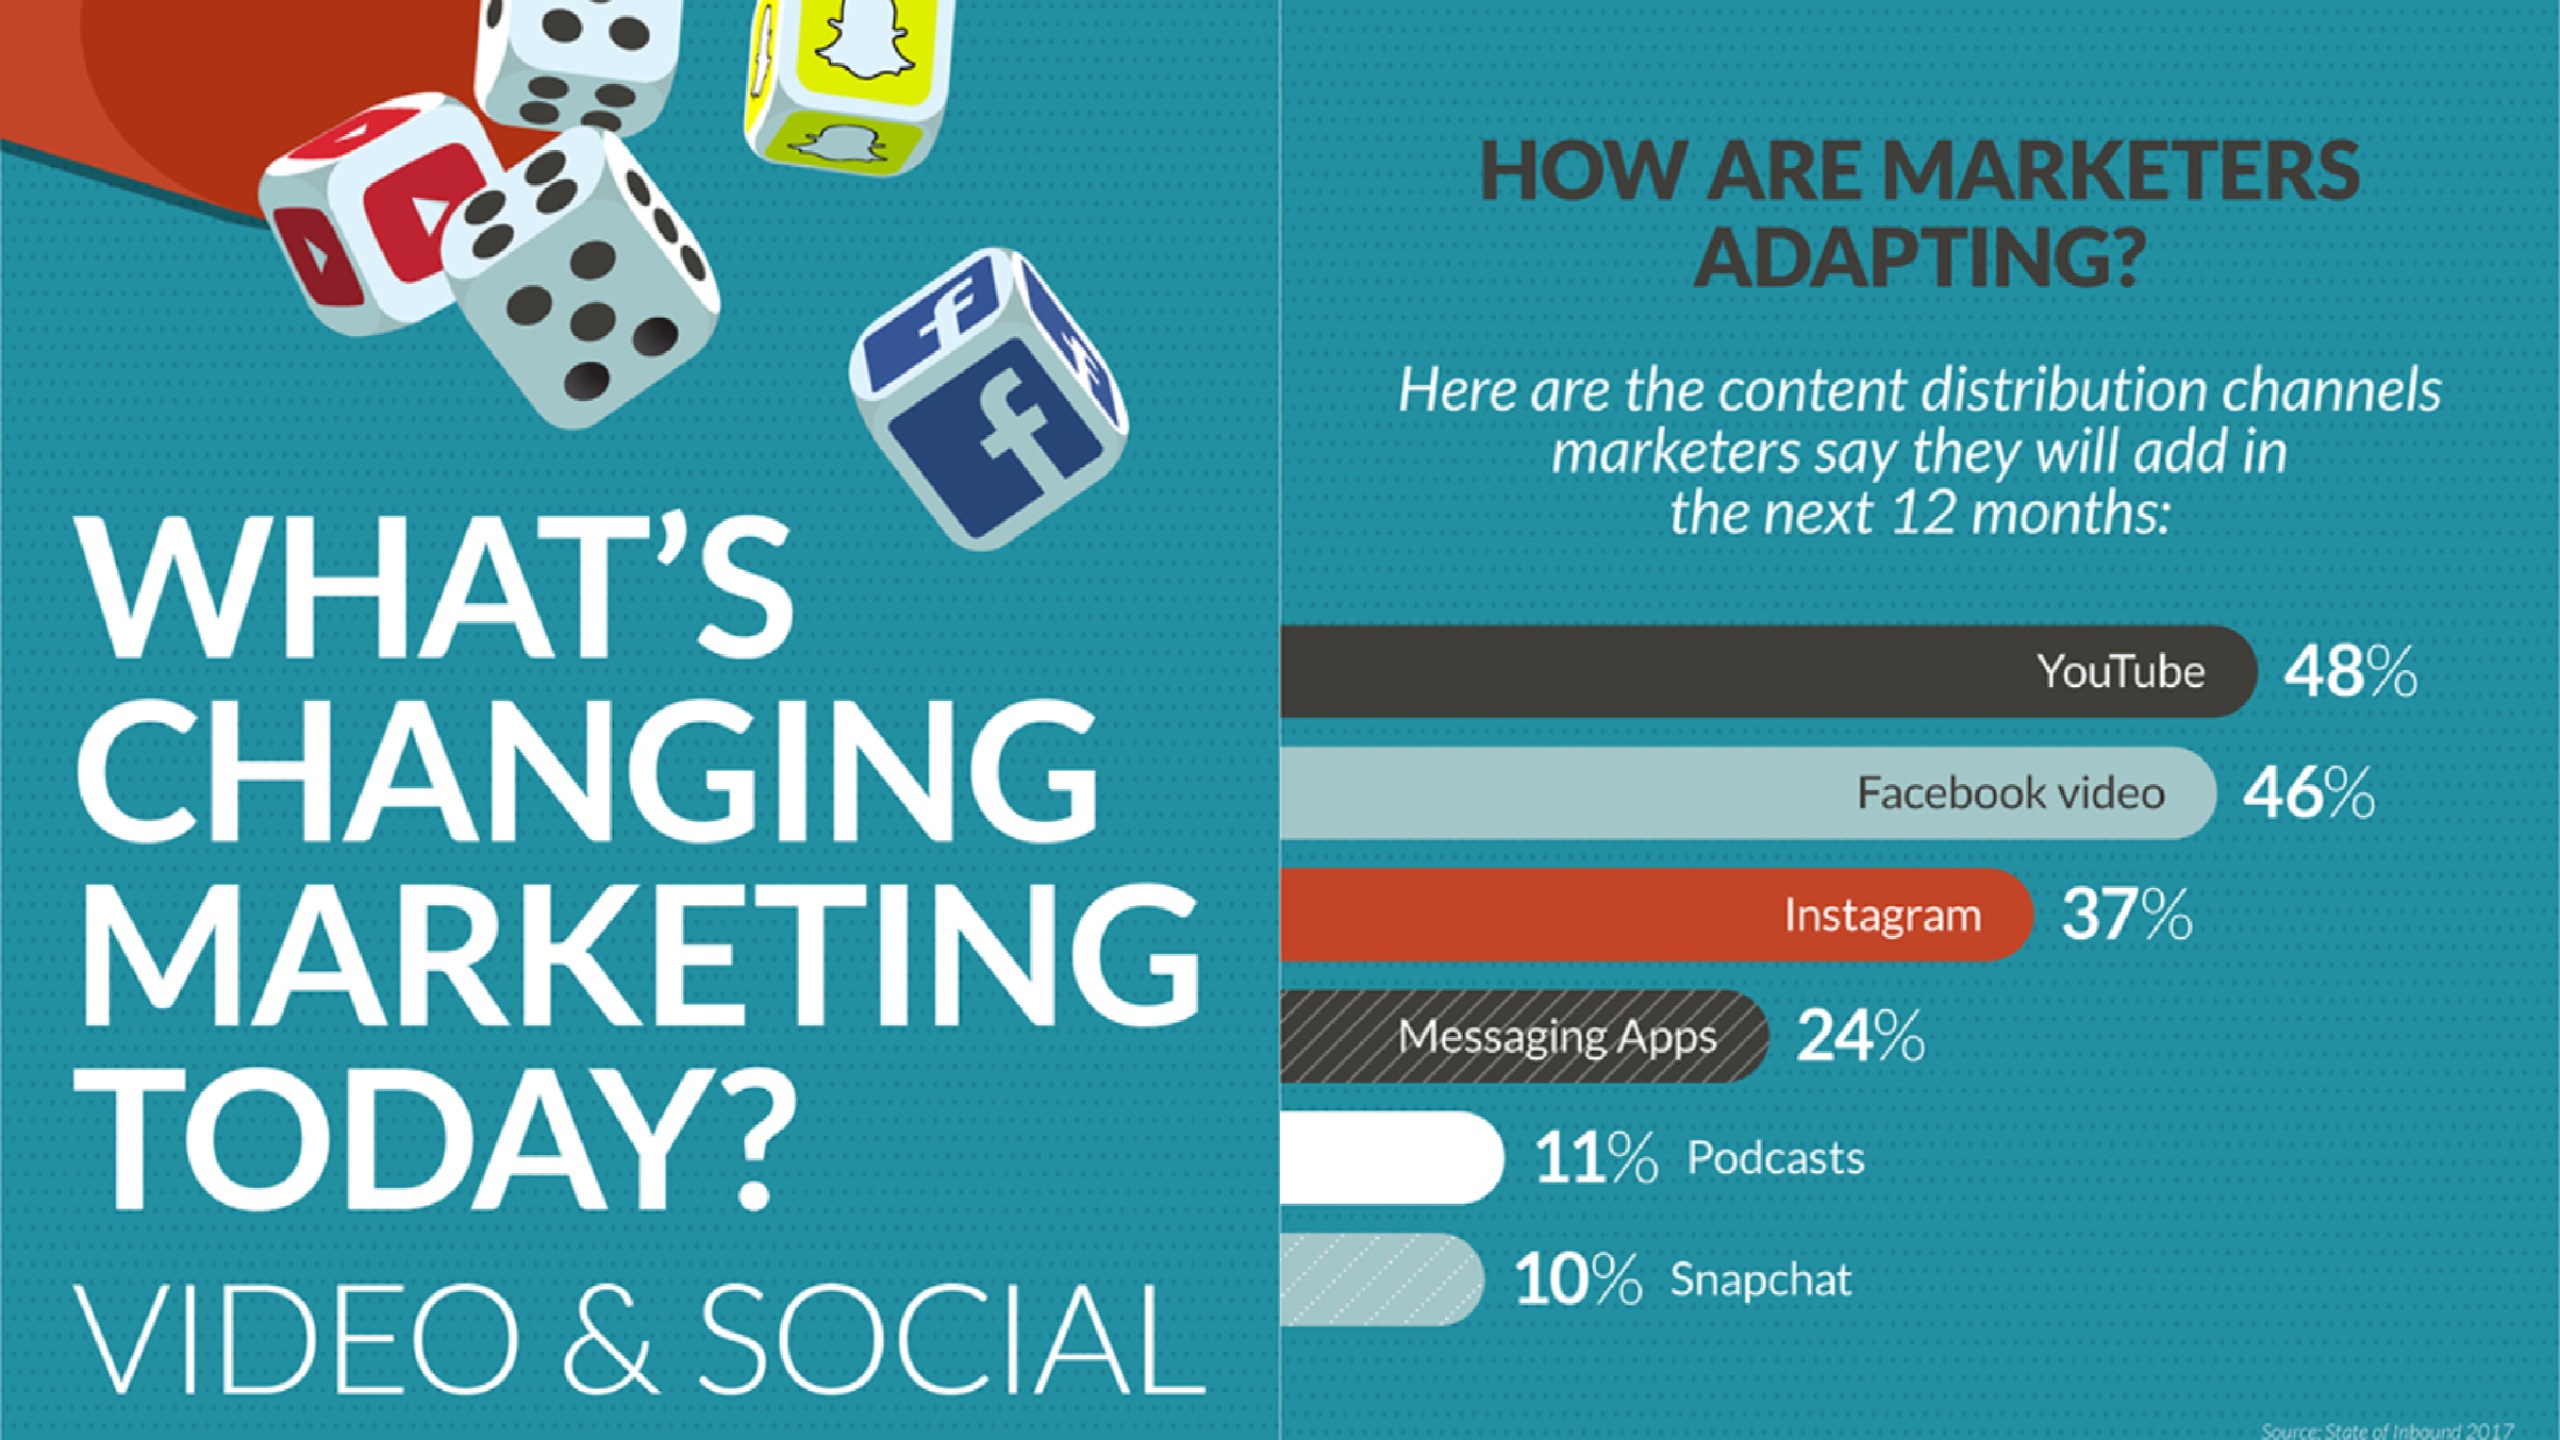 What’s Changing Marketing Today? [Marketing Infographic]